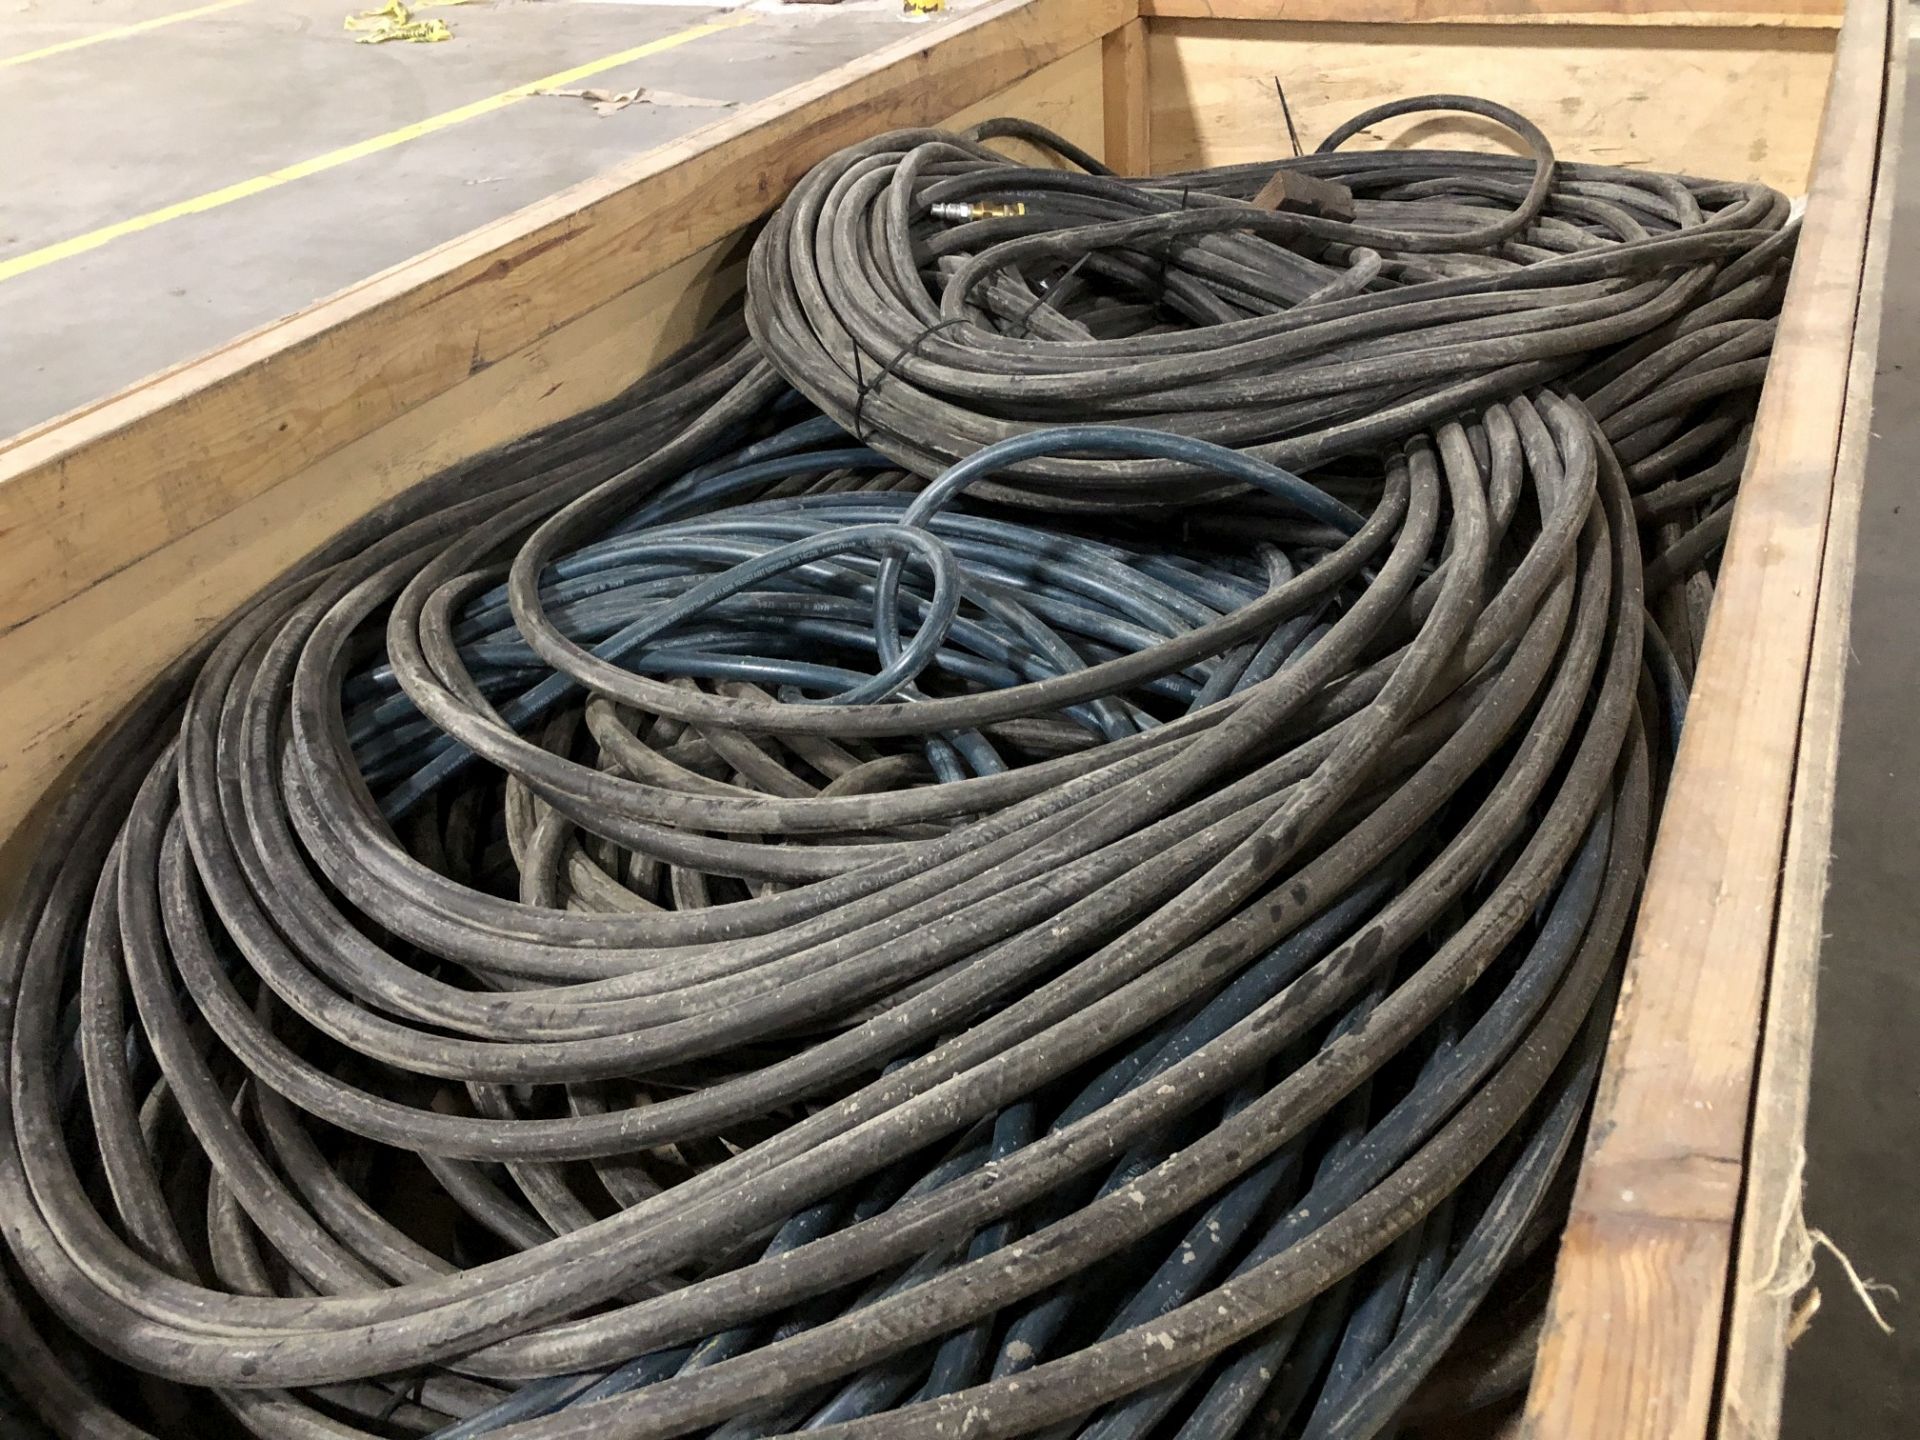 Wooden Box w/ Large Quantity of Hoses - Image 3 of 4